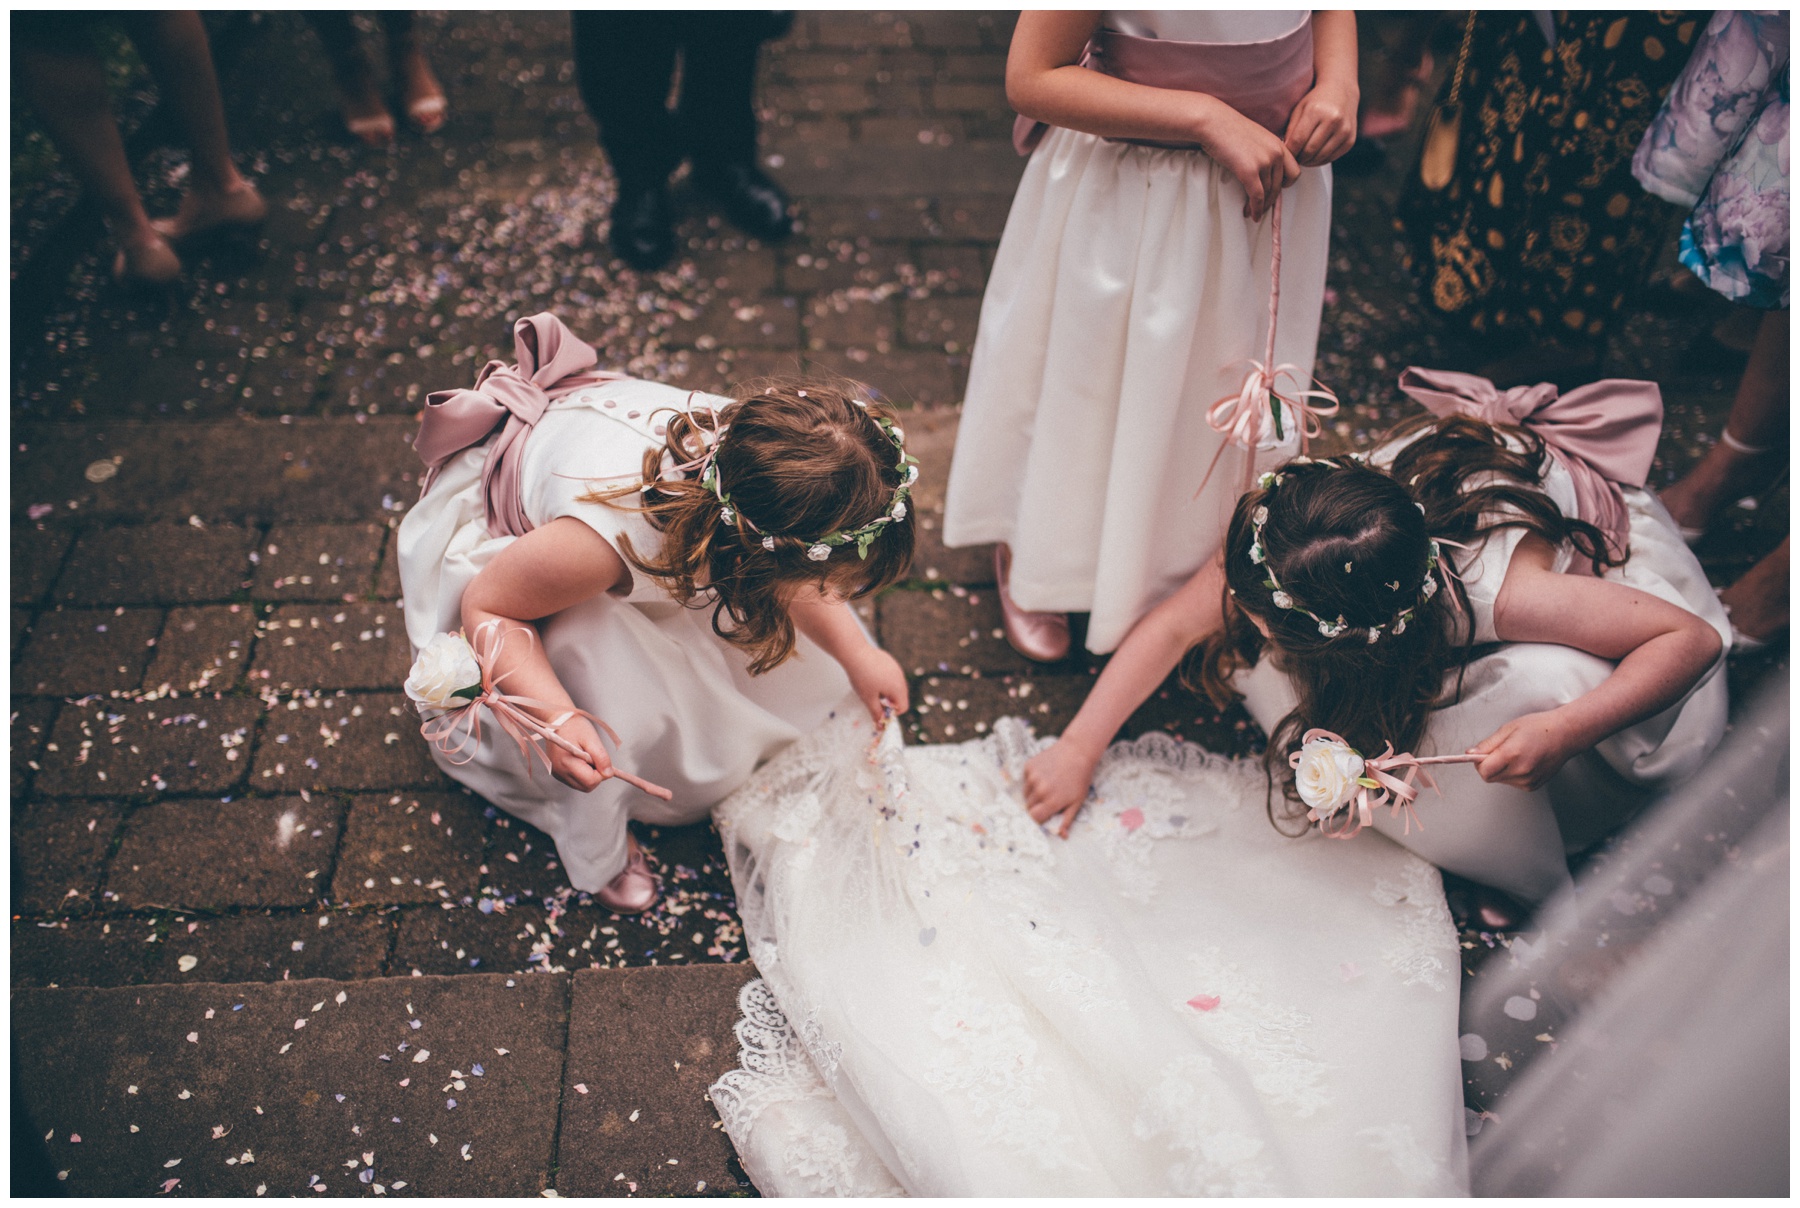 Flowergirls pick the confetti of the brides dress after the guests throw it at her and her new husband at Merrydale Manor wedding.